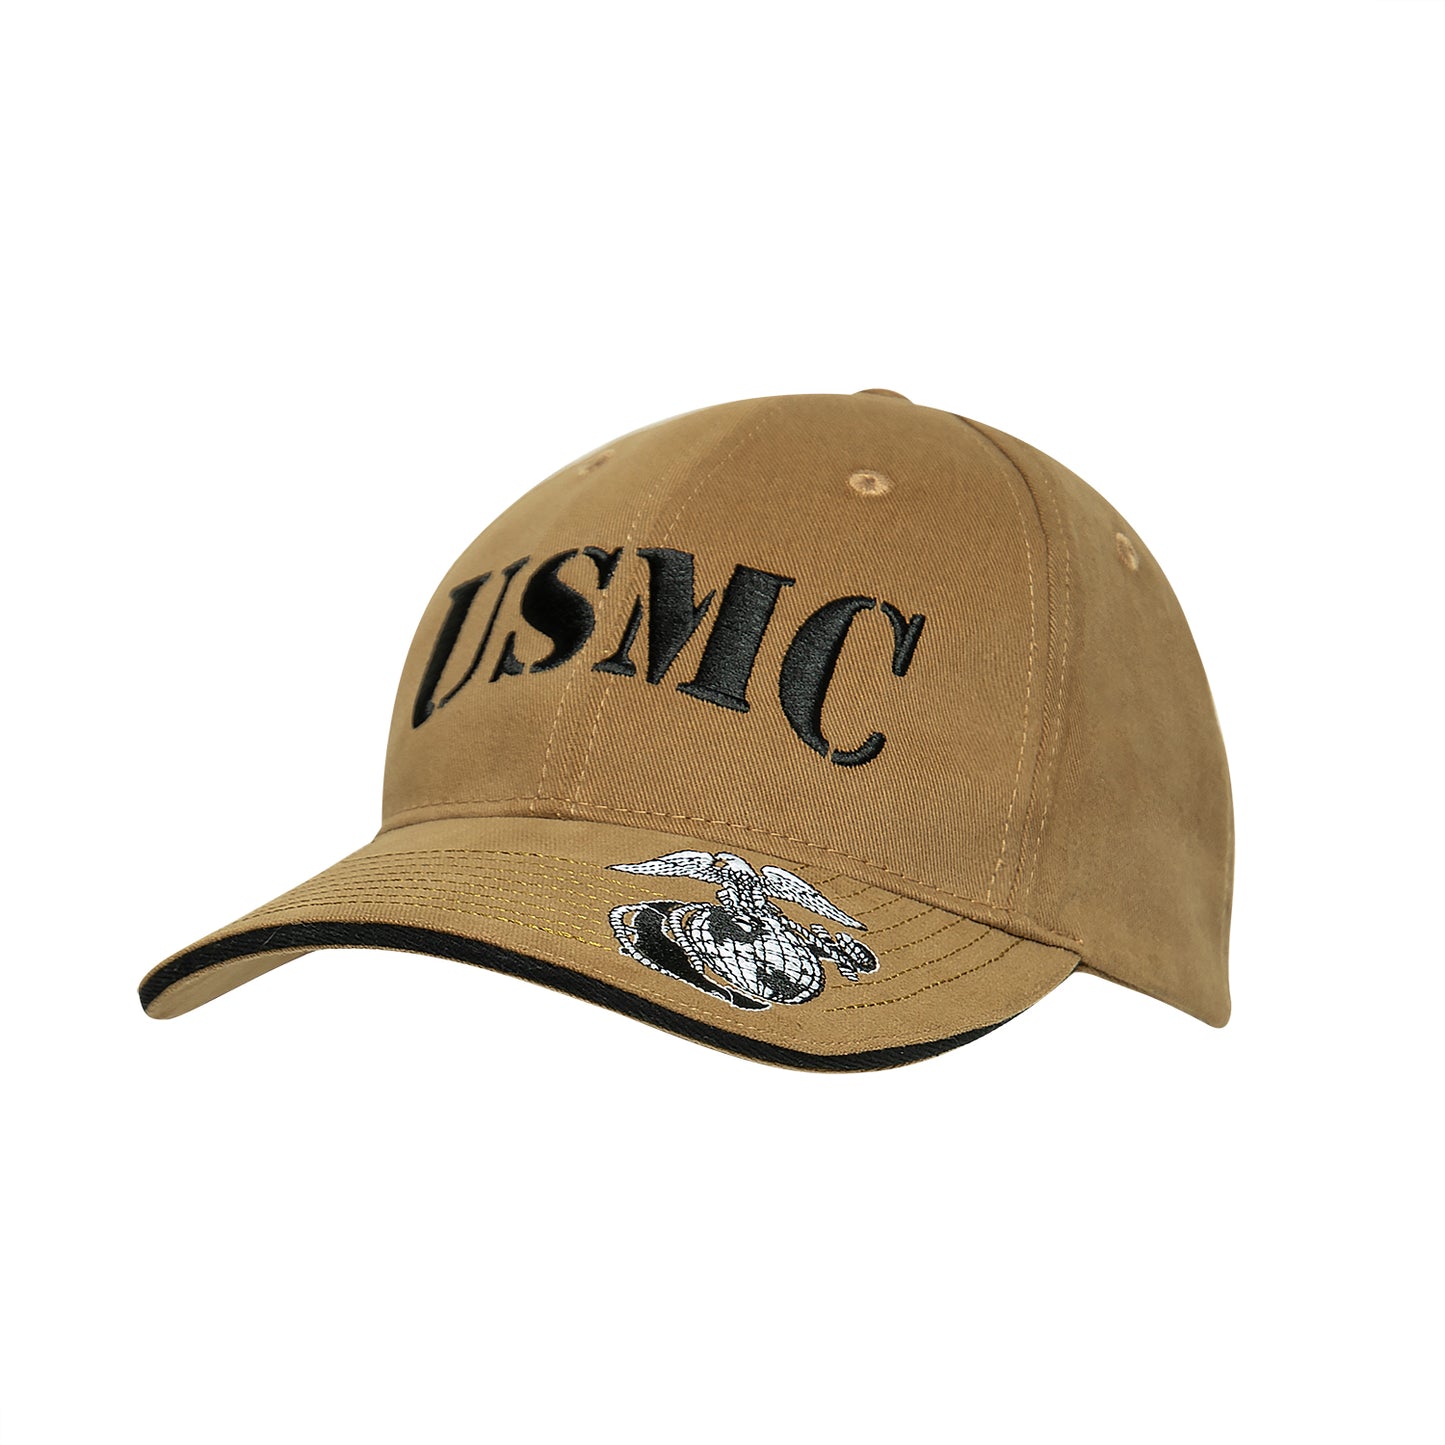 Deluxe Vintage USMC Embroidered Low Pro Cap